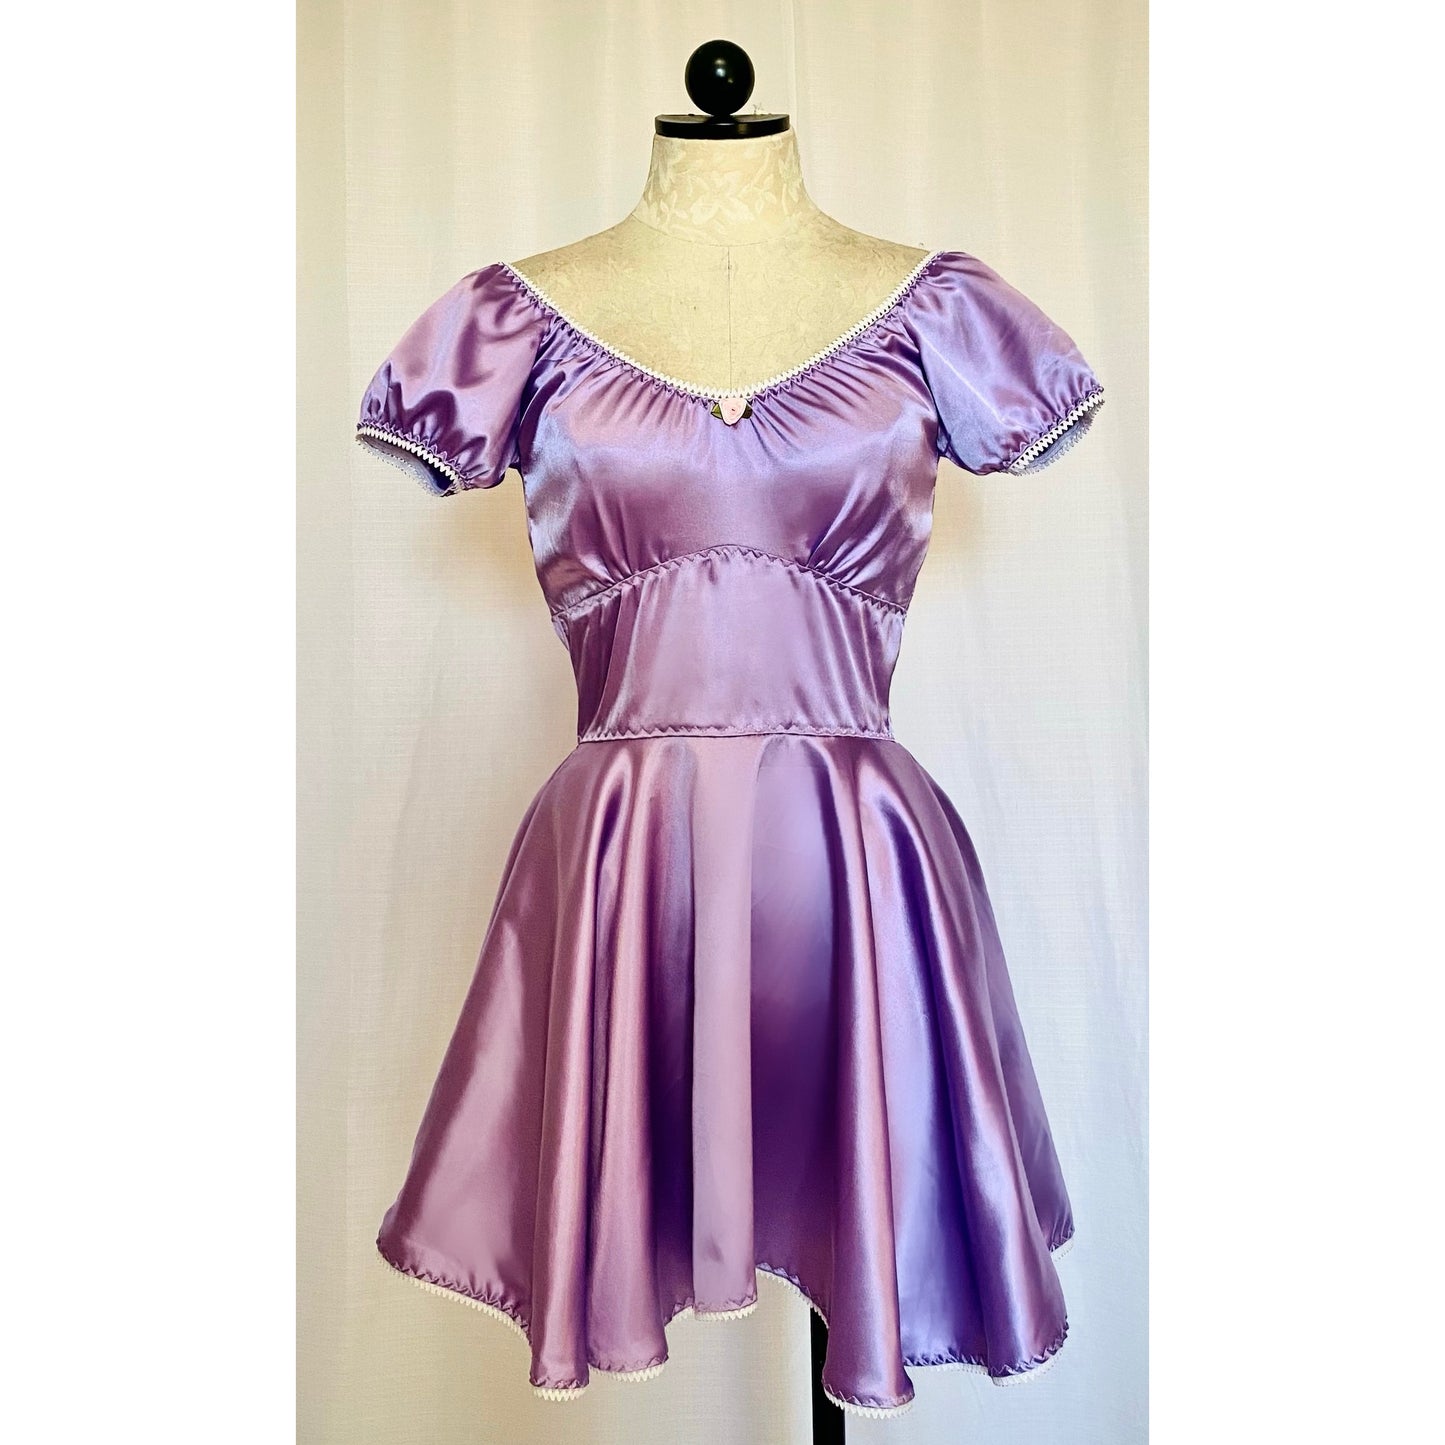 The Missy Dress in Violet